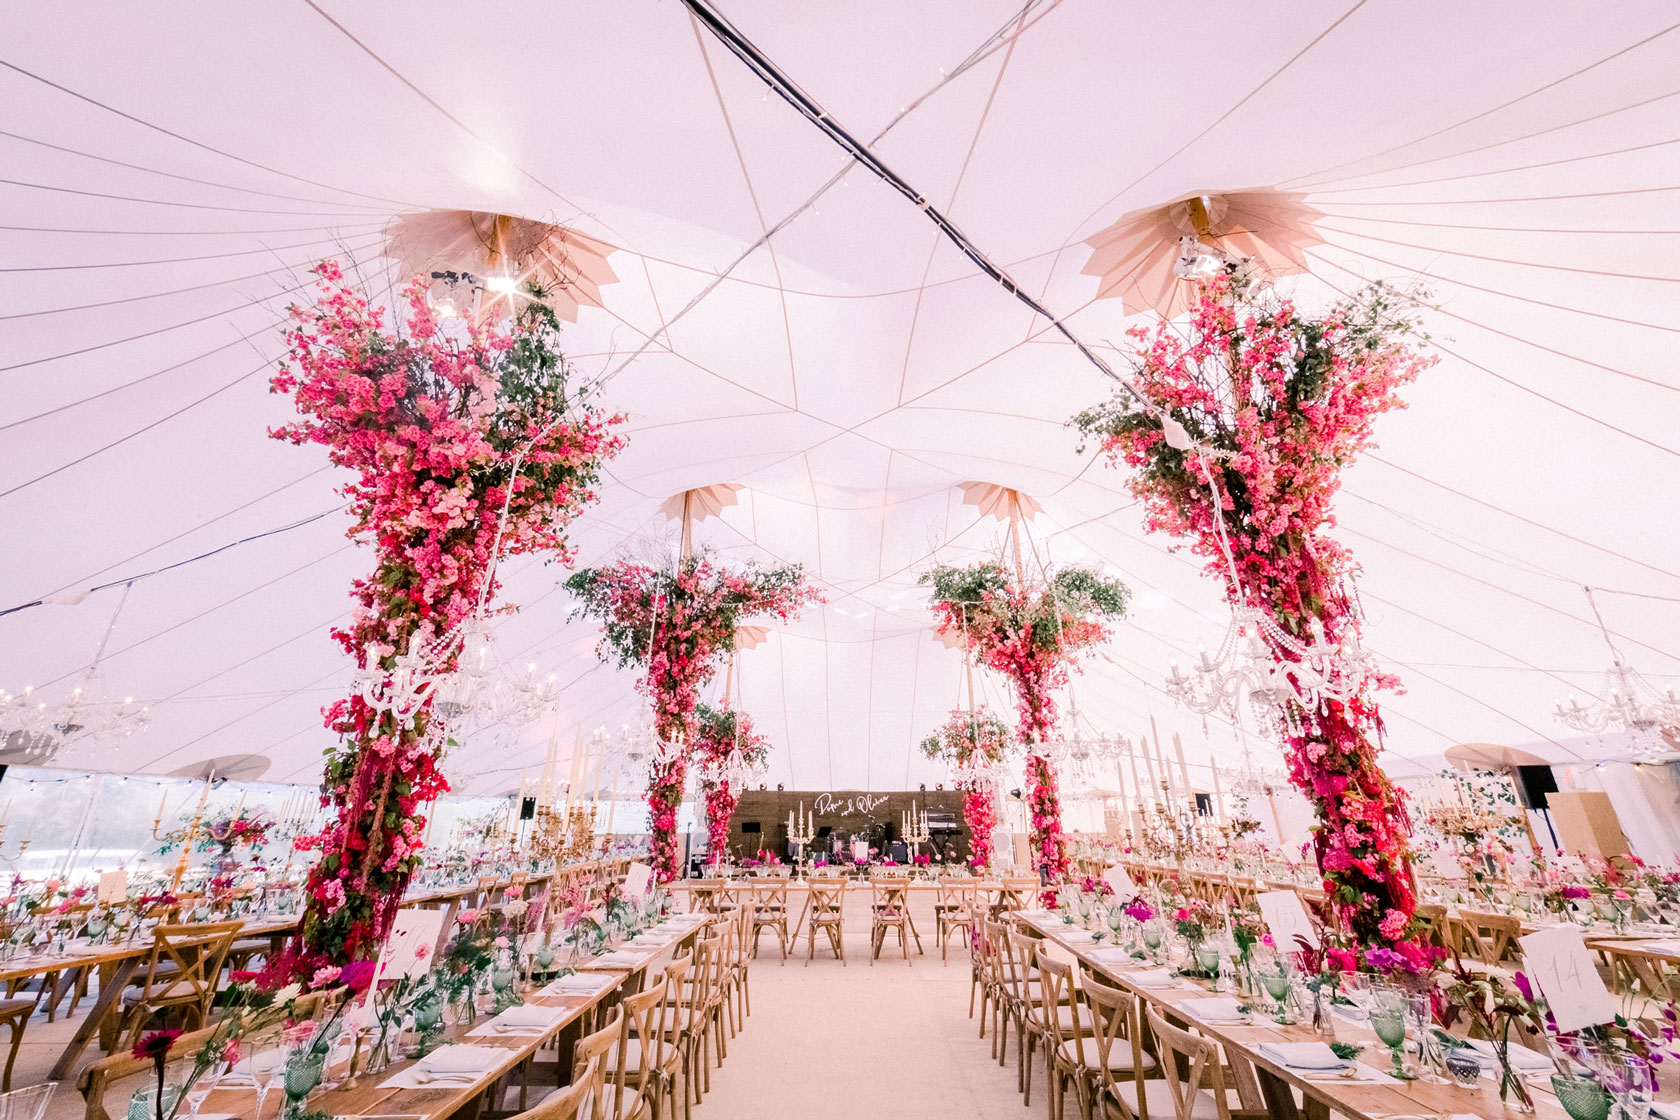 Soho Farmhouse wedding breakfast with huge pink floral columns from floor to ceiling inside a marquee